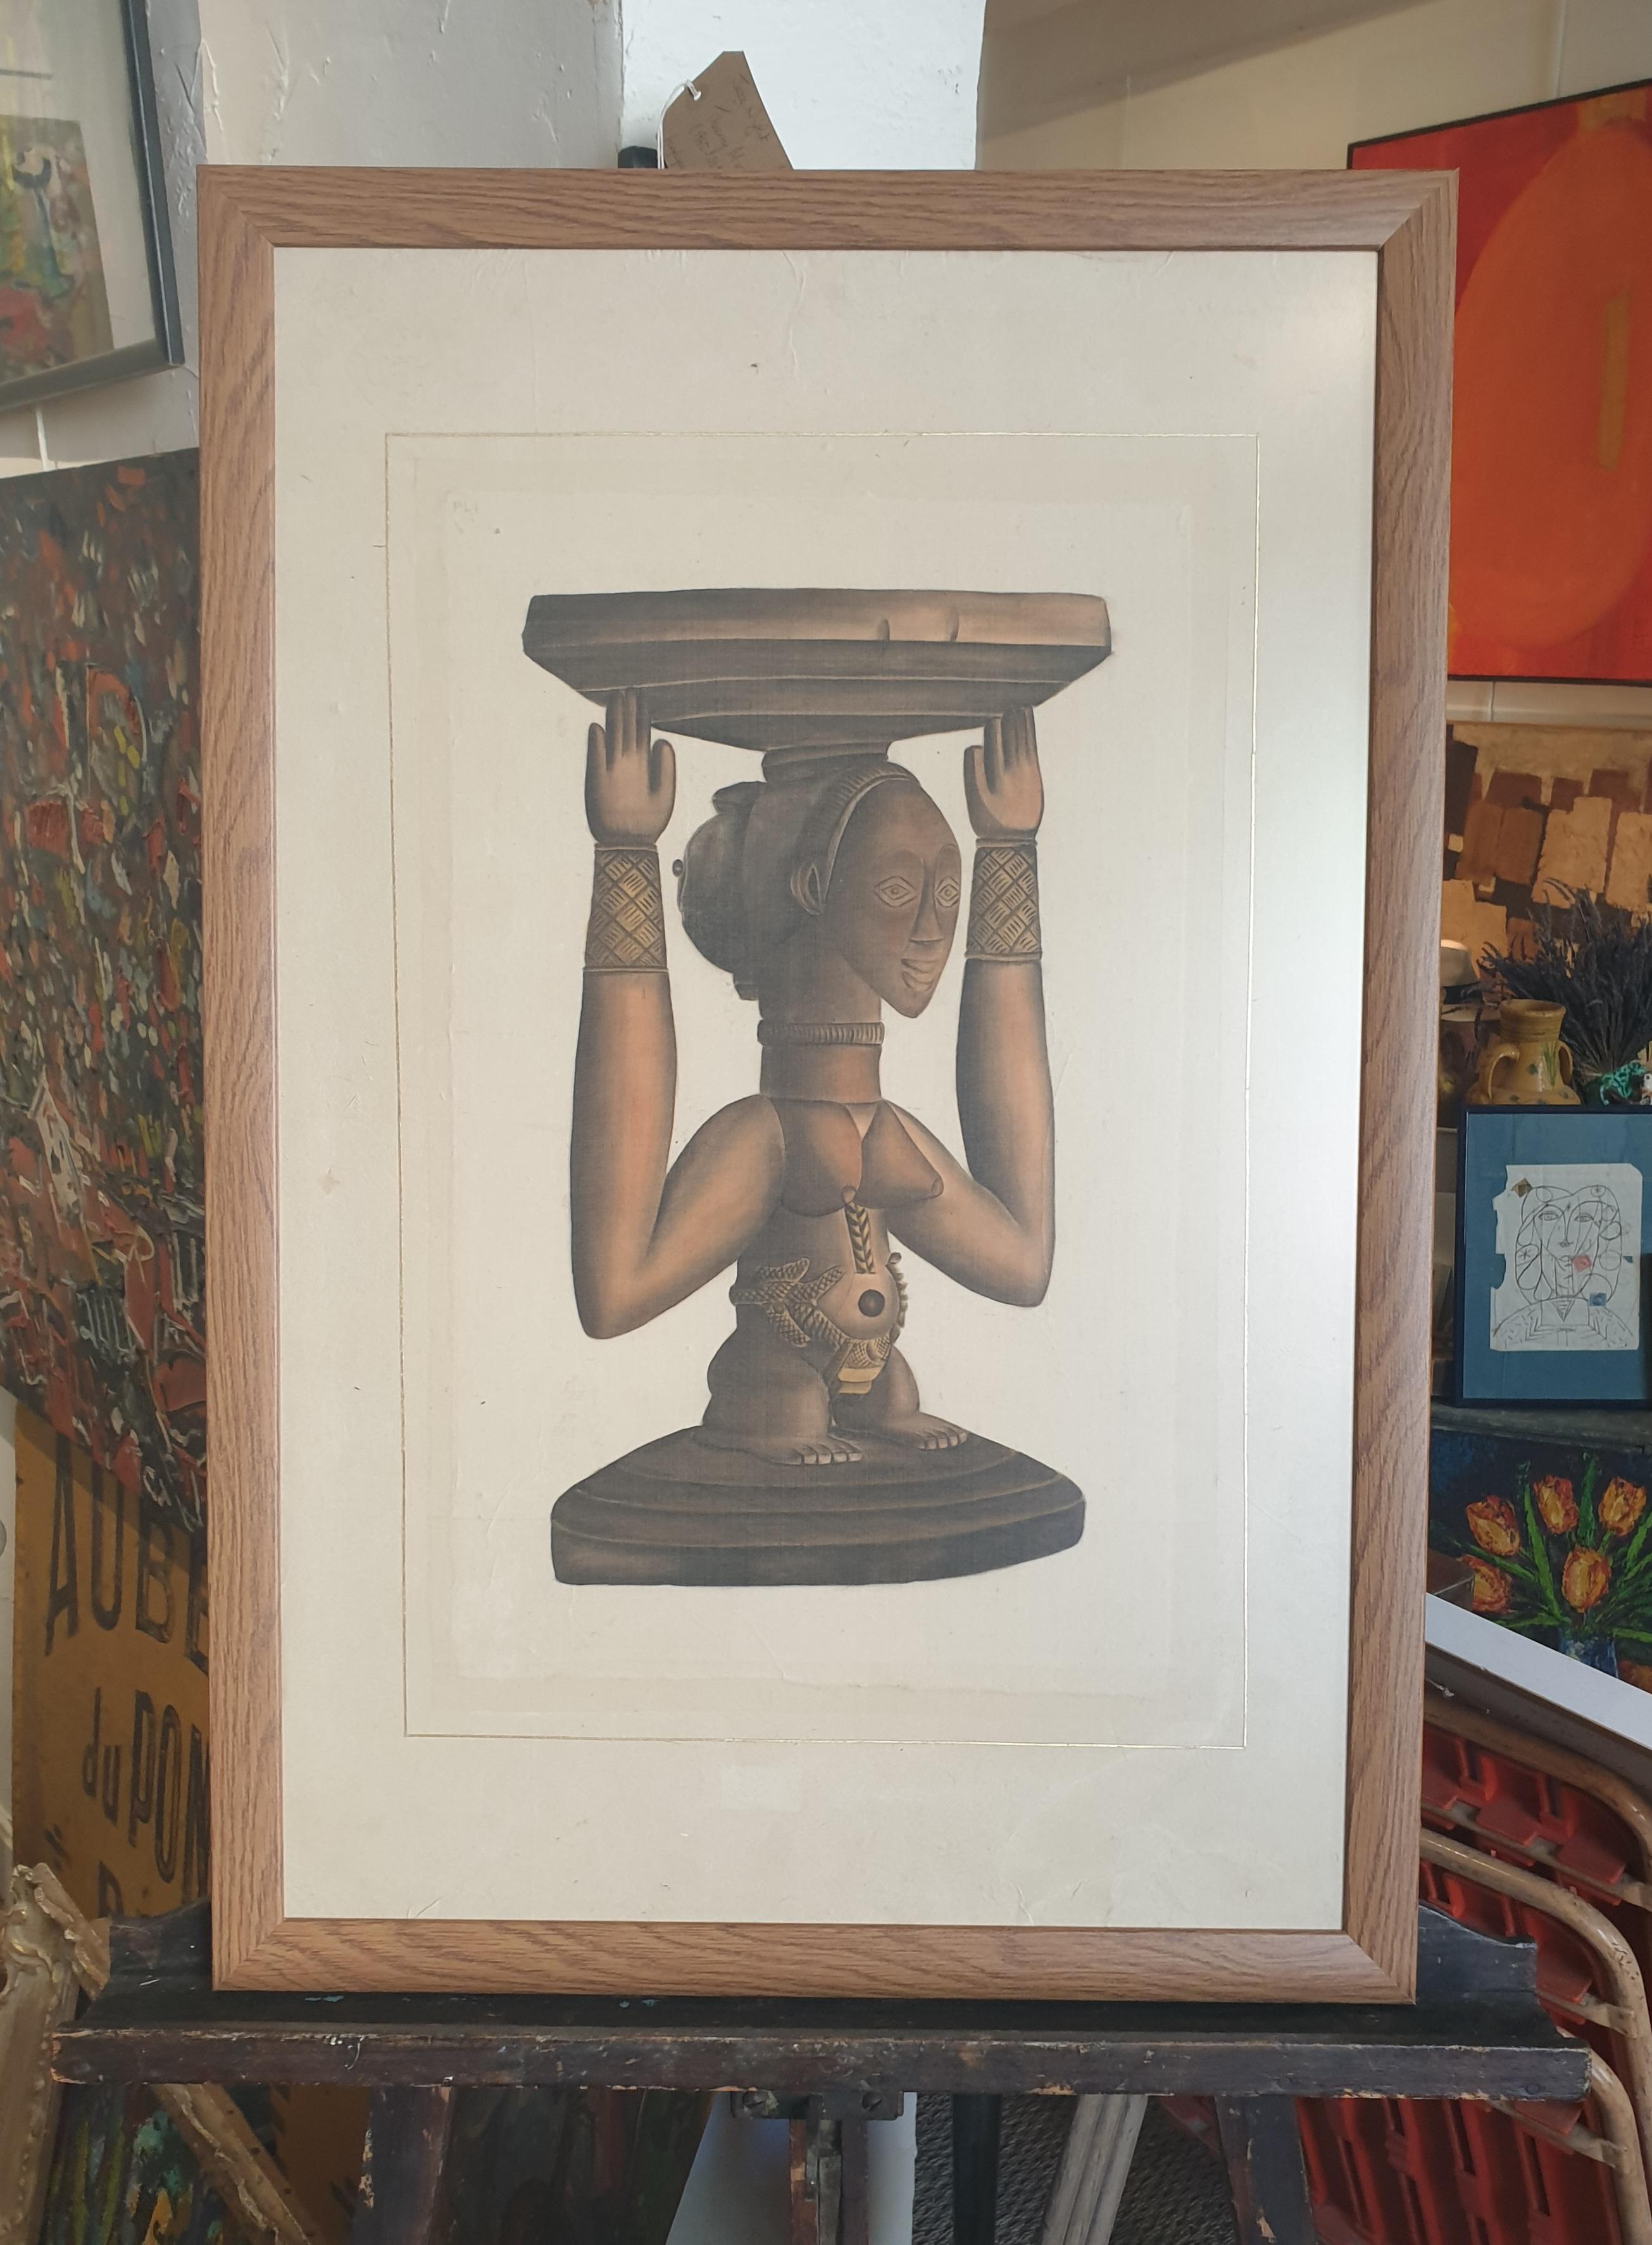 Watercolour on Handmade Paper Laid on Vélin d'Arches of an African Sculpture. - Realist Art by La Roche Laffitte